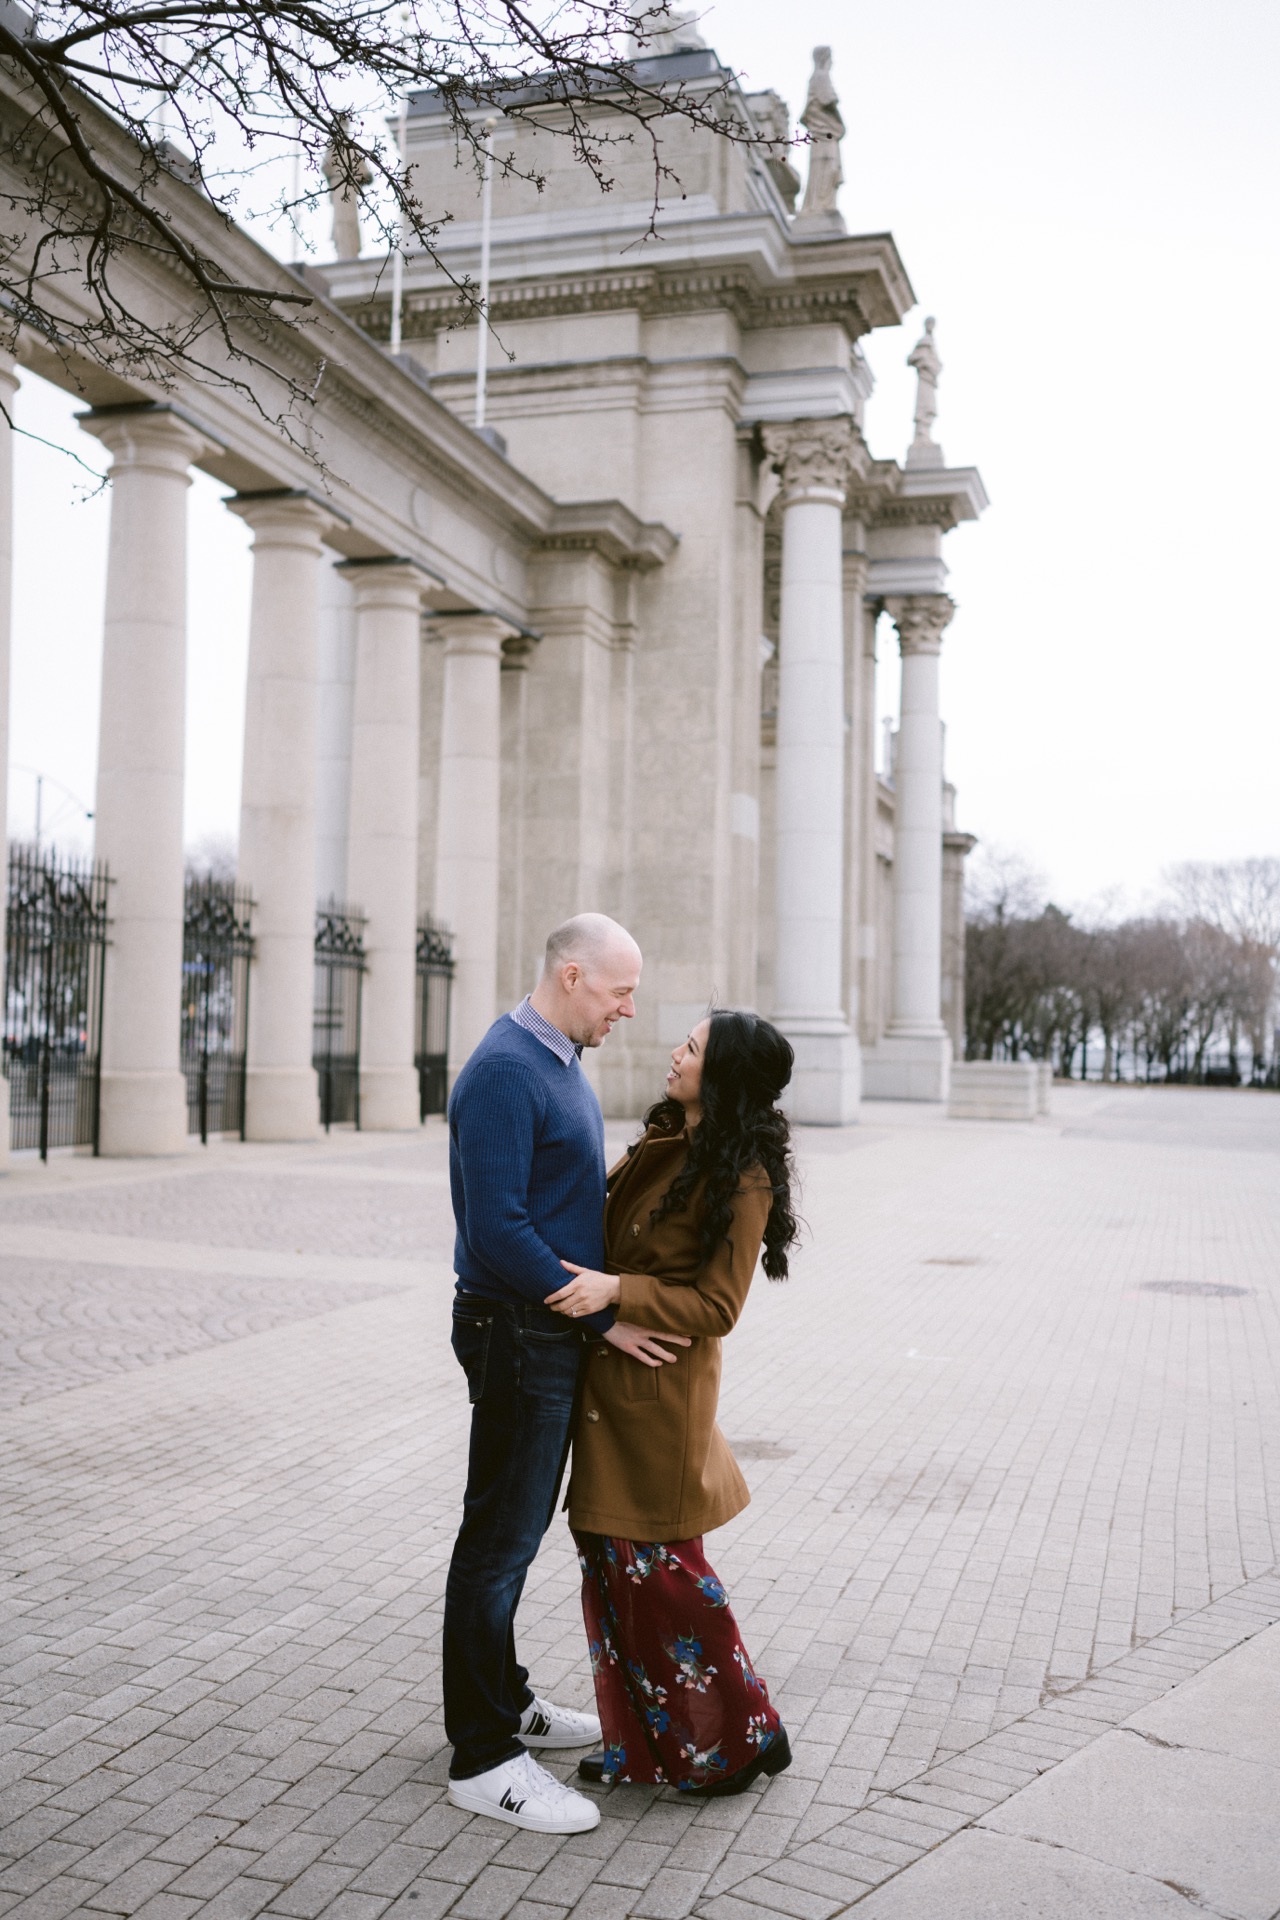 A couple standing close and looking at each other affectionately in front of a building with grand columns during their engagement session